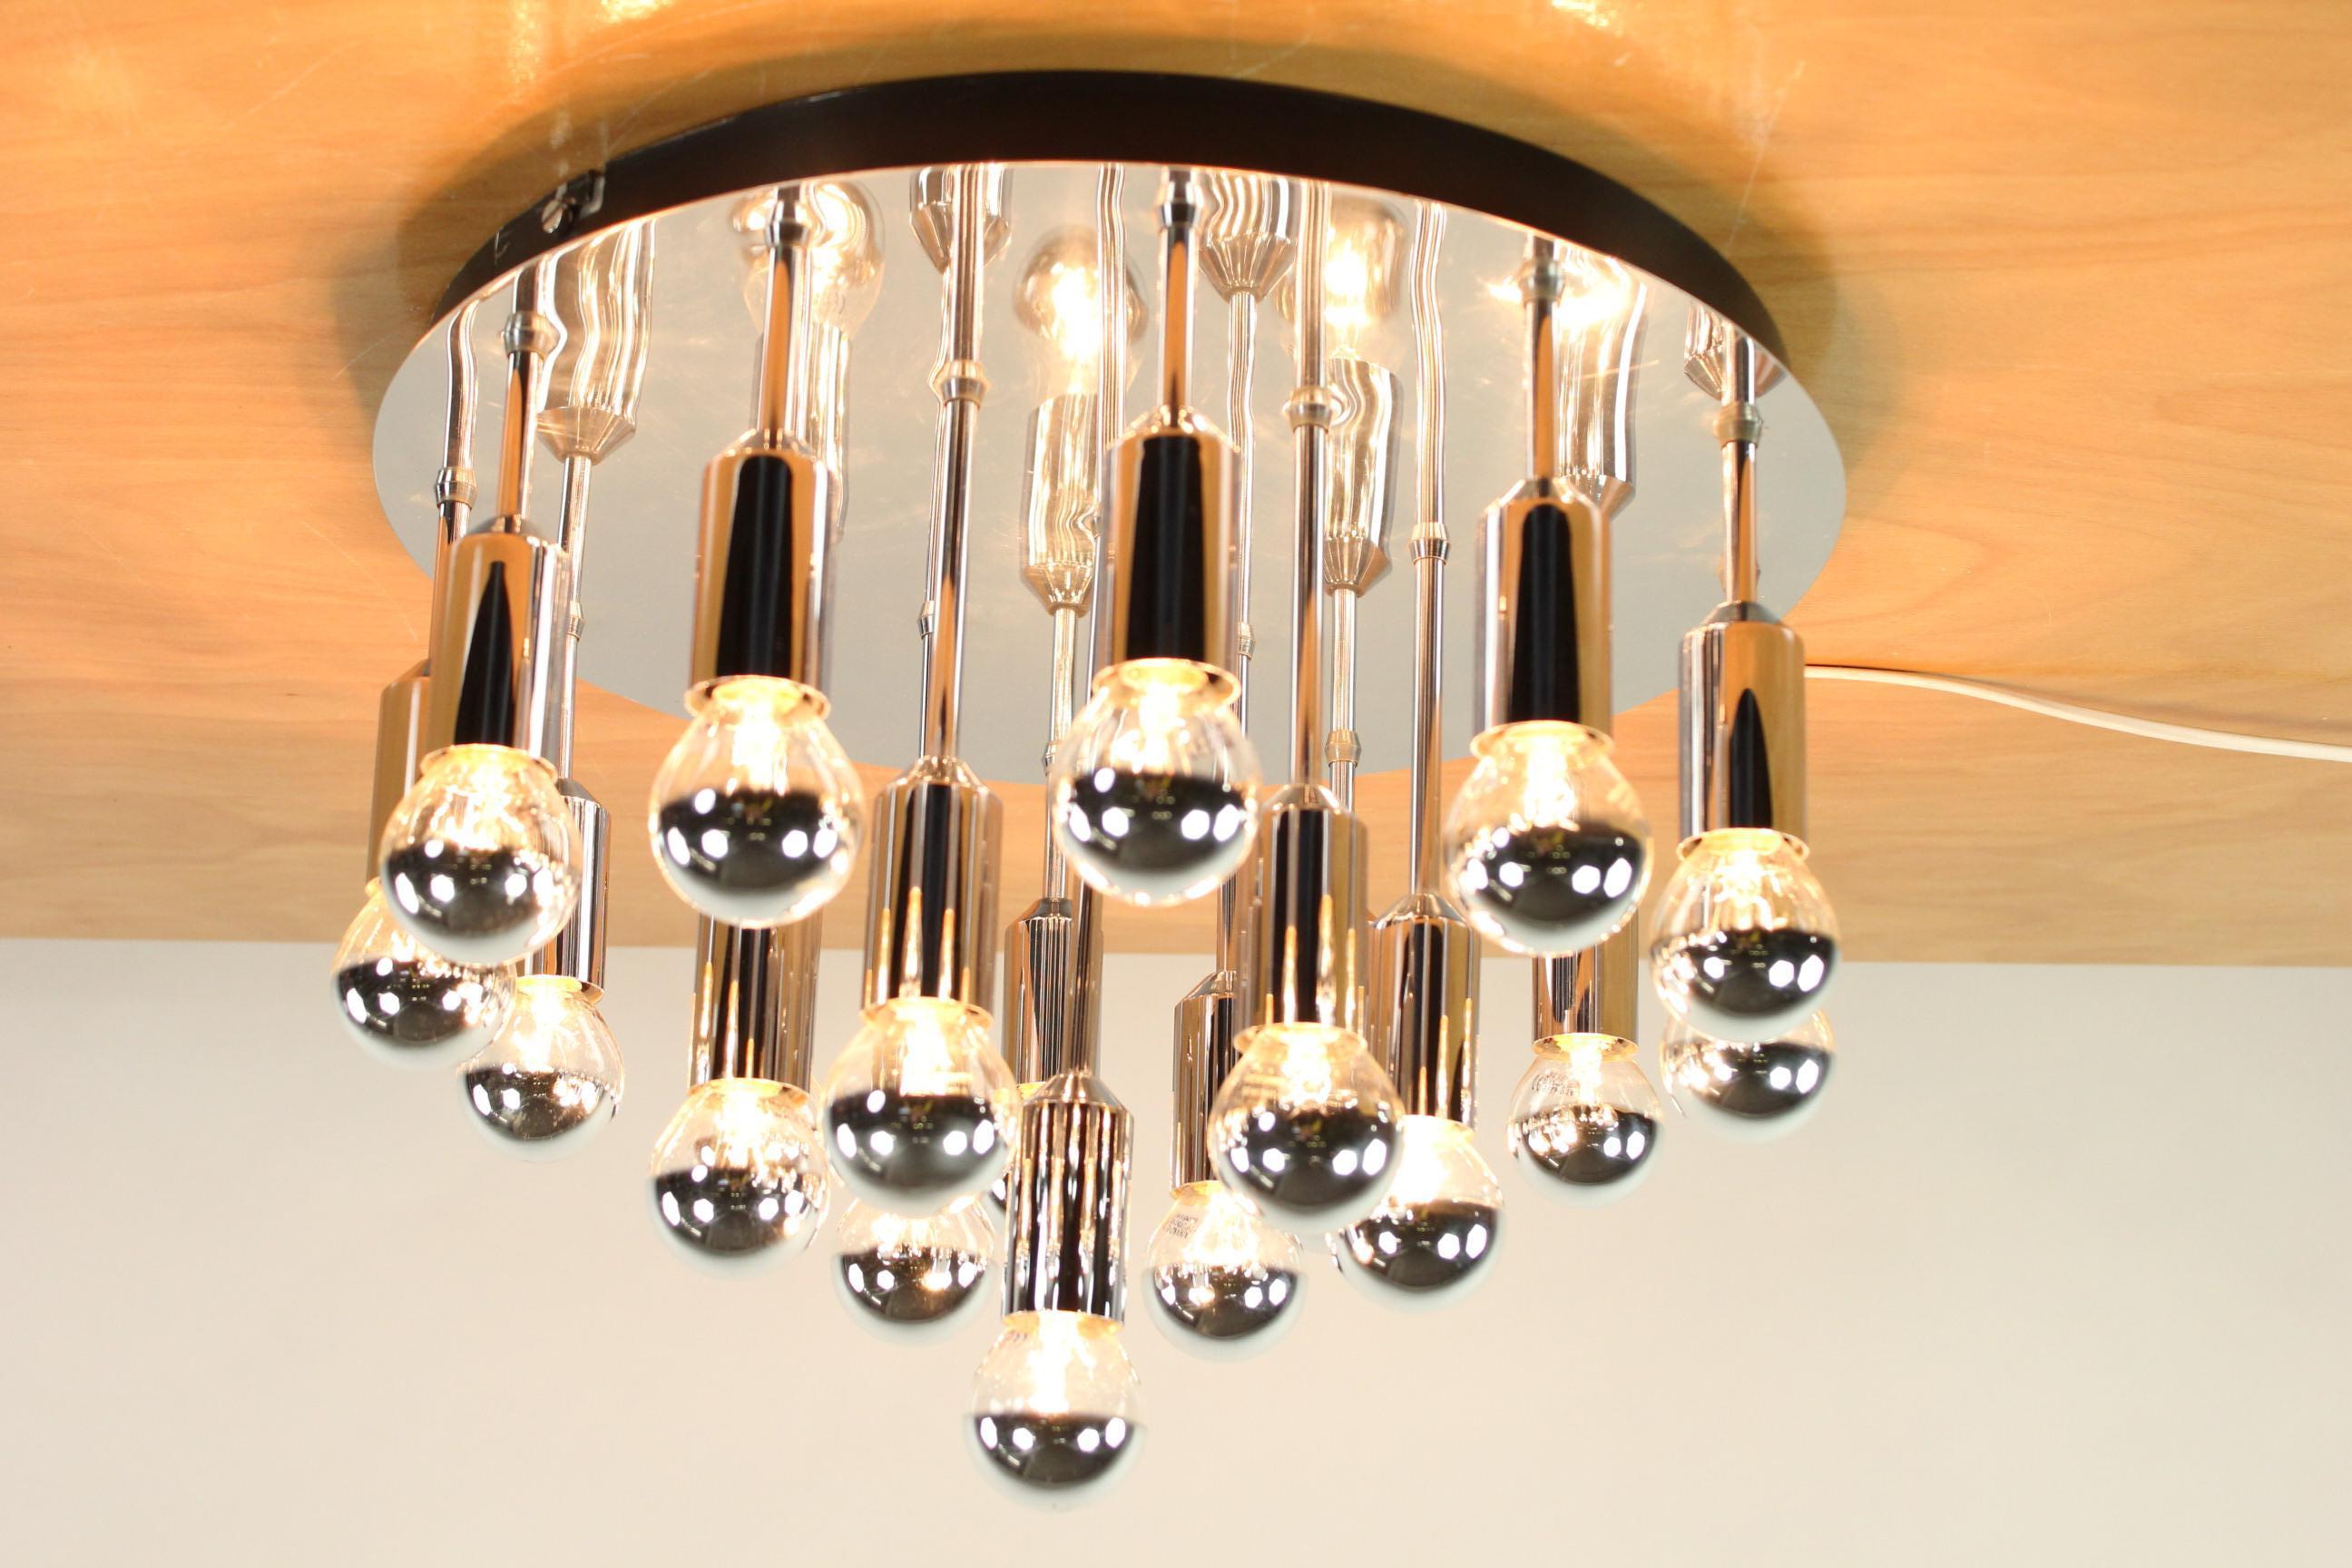 Original 1970s Cosack ceiling fixture
A German high quality steel made flush mount with 19 arms!
Width 15'' - height without bulbs 9.5''
You need 19 bulbs small Edison screw (E14) to operate
not included in this offer,
Weight 2.8 kg.
 